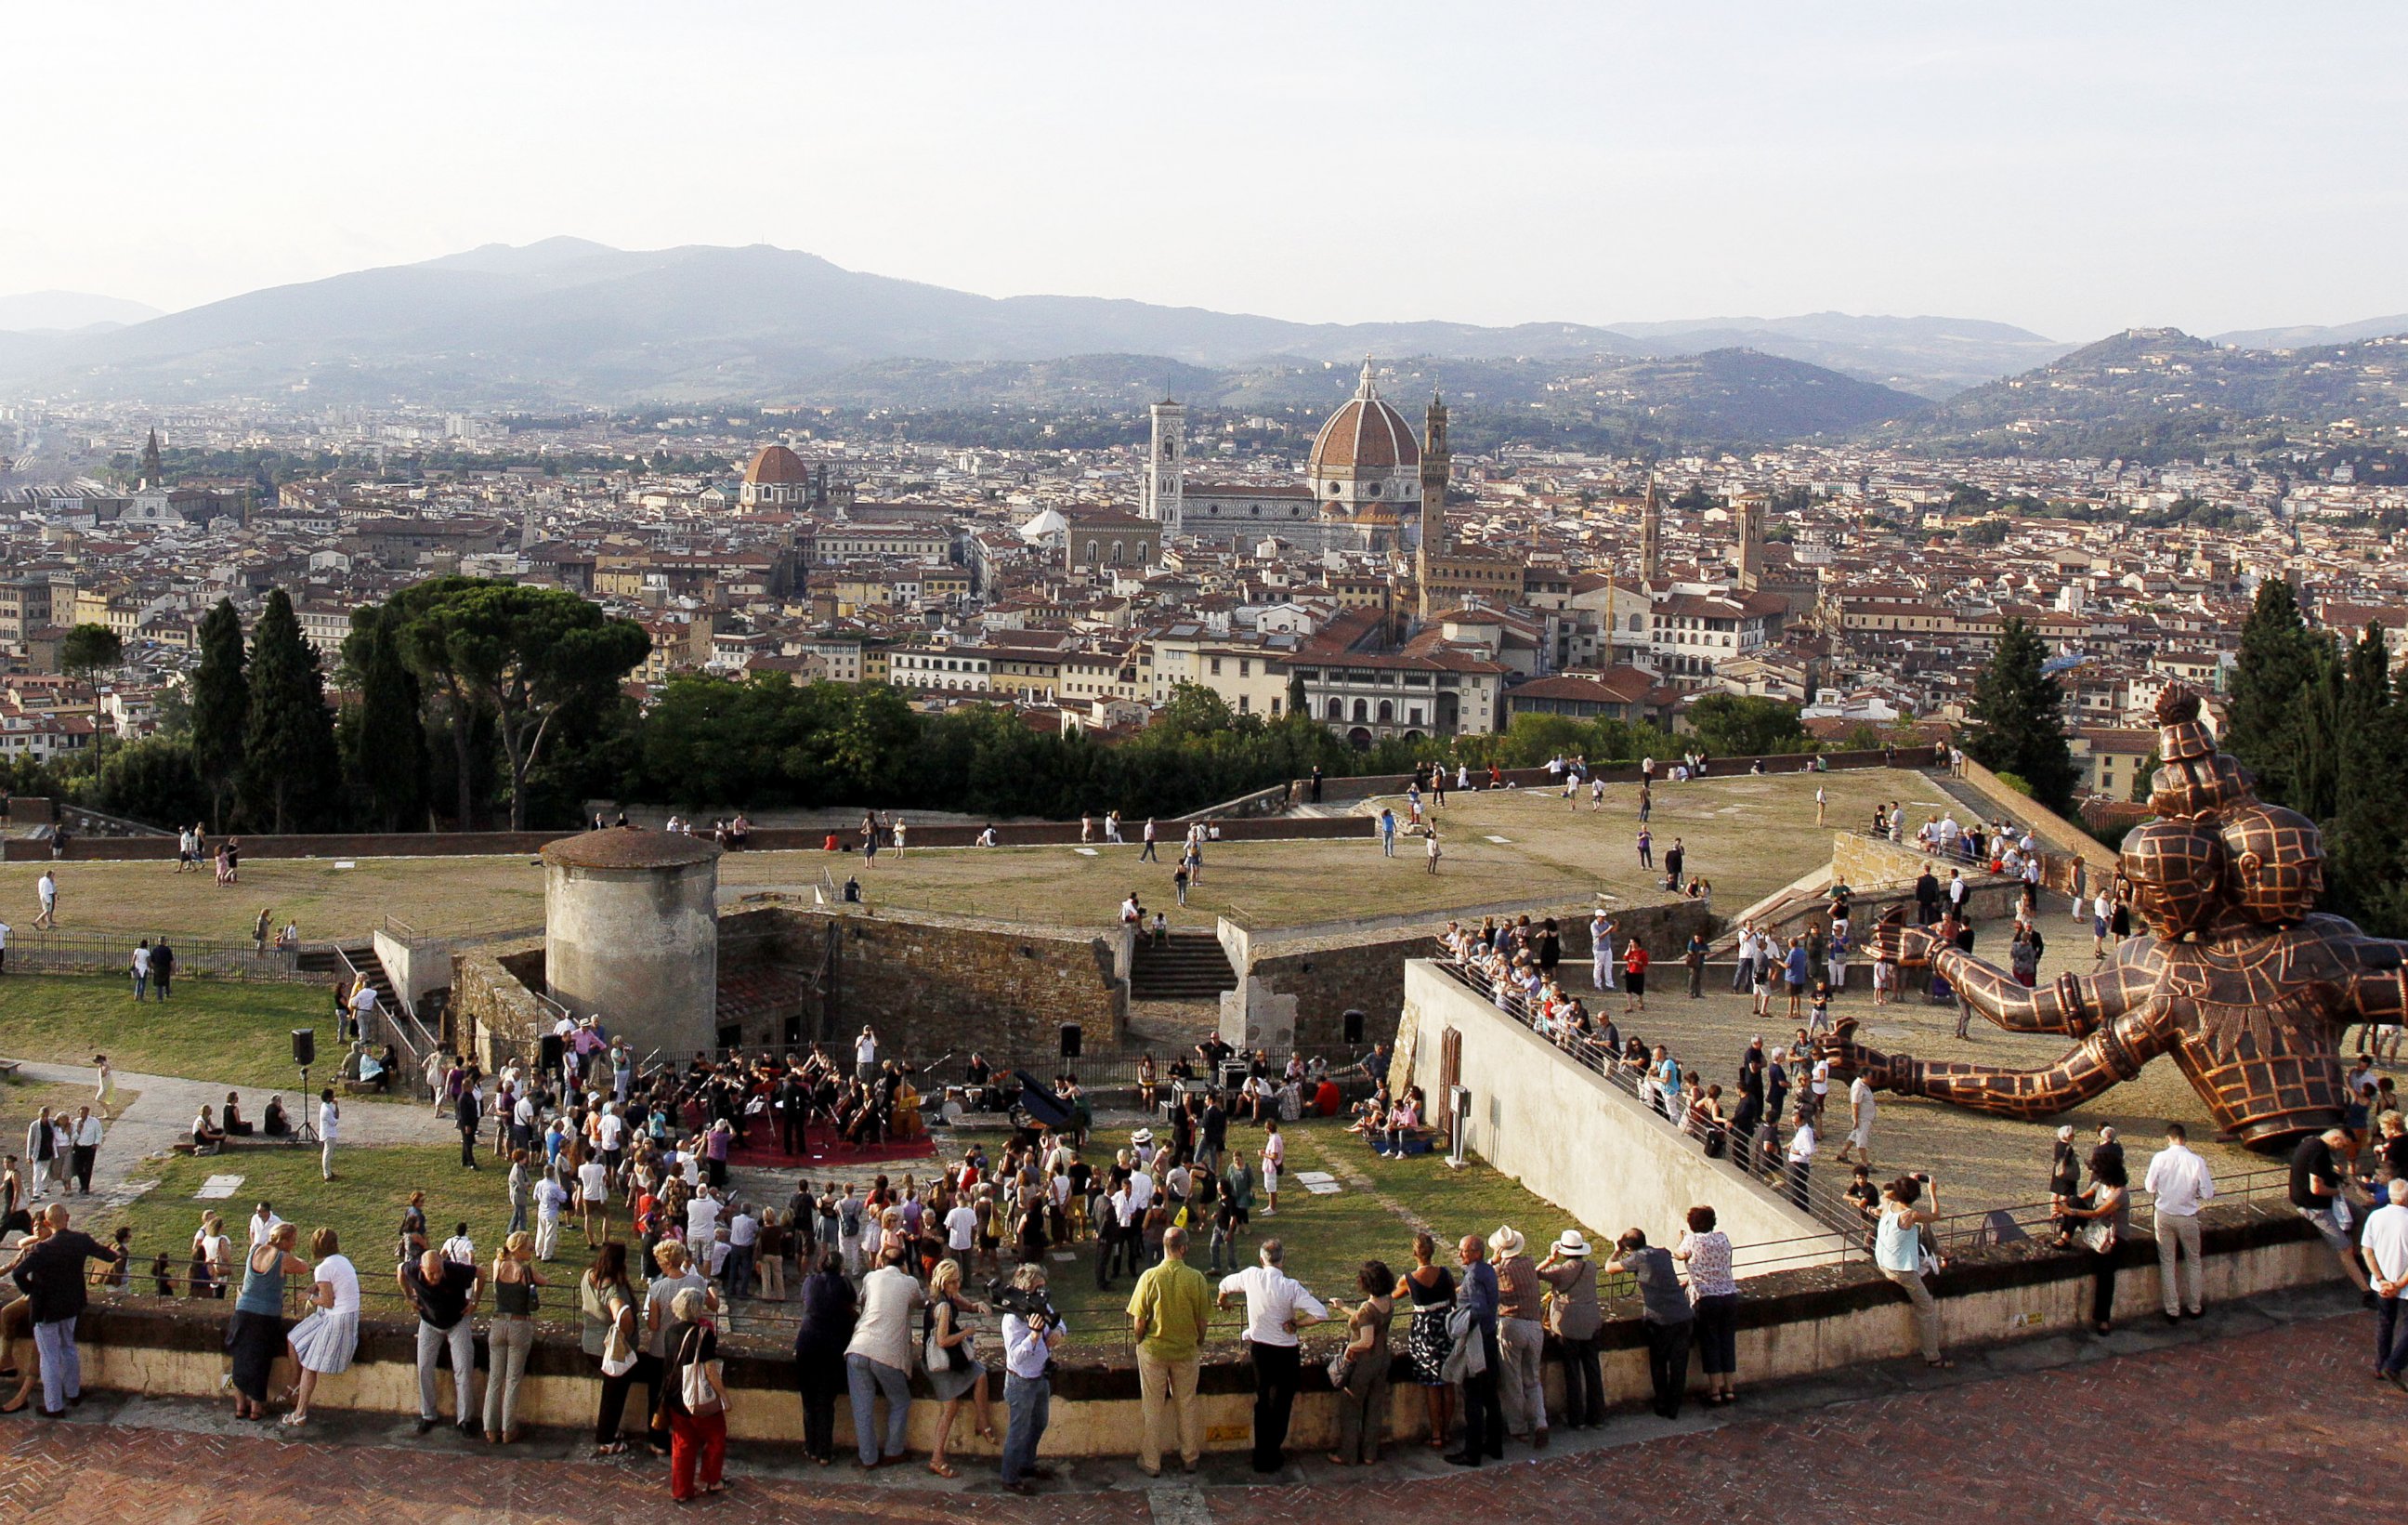 PHOTO: Tourists enjoy the view from Forte di Belvedere in Florence, Italy on July 8, 2013.